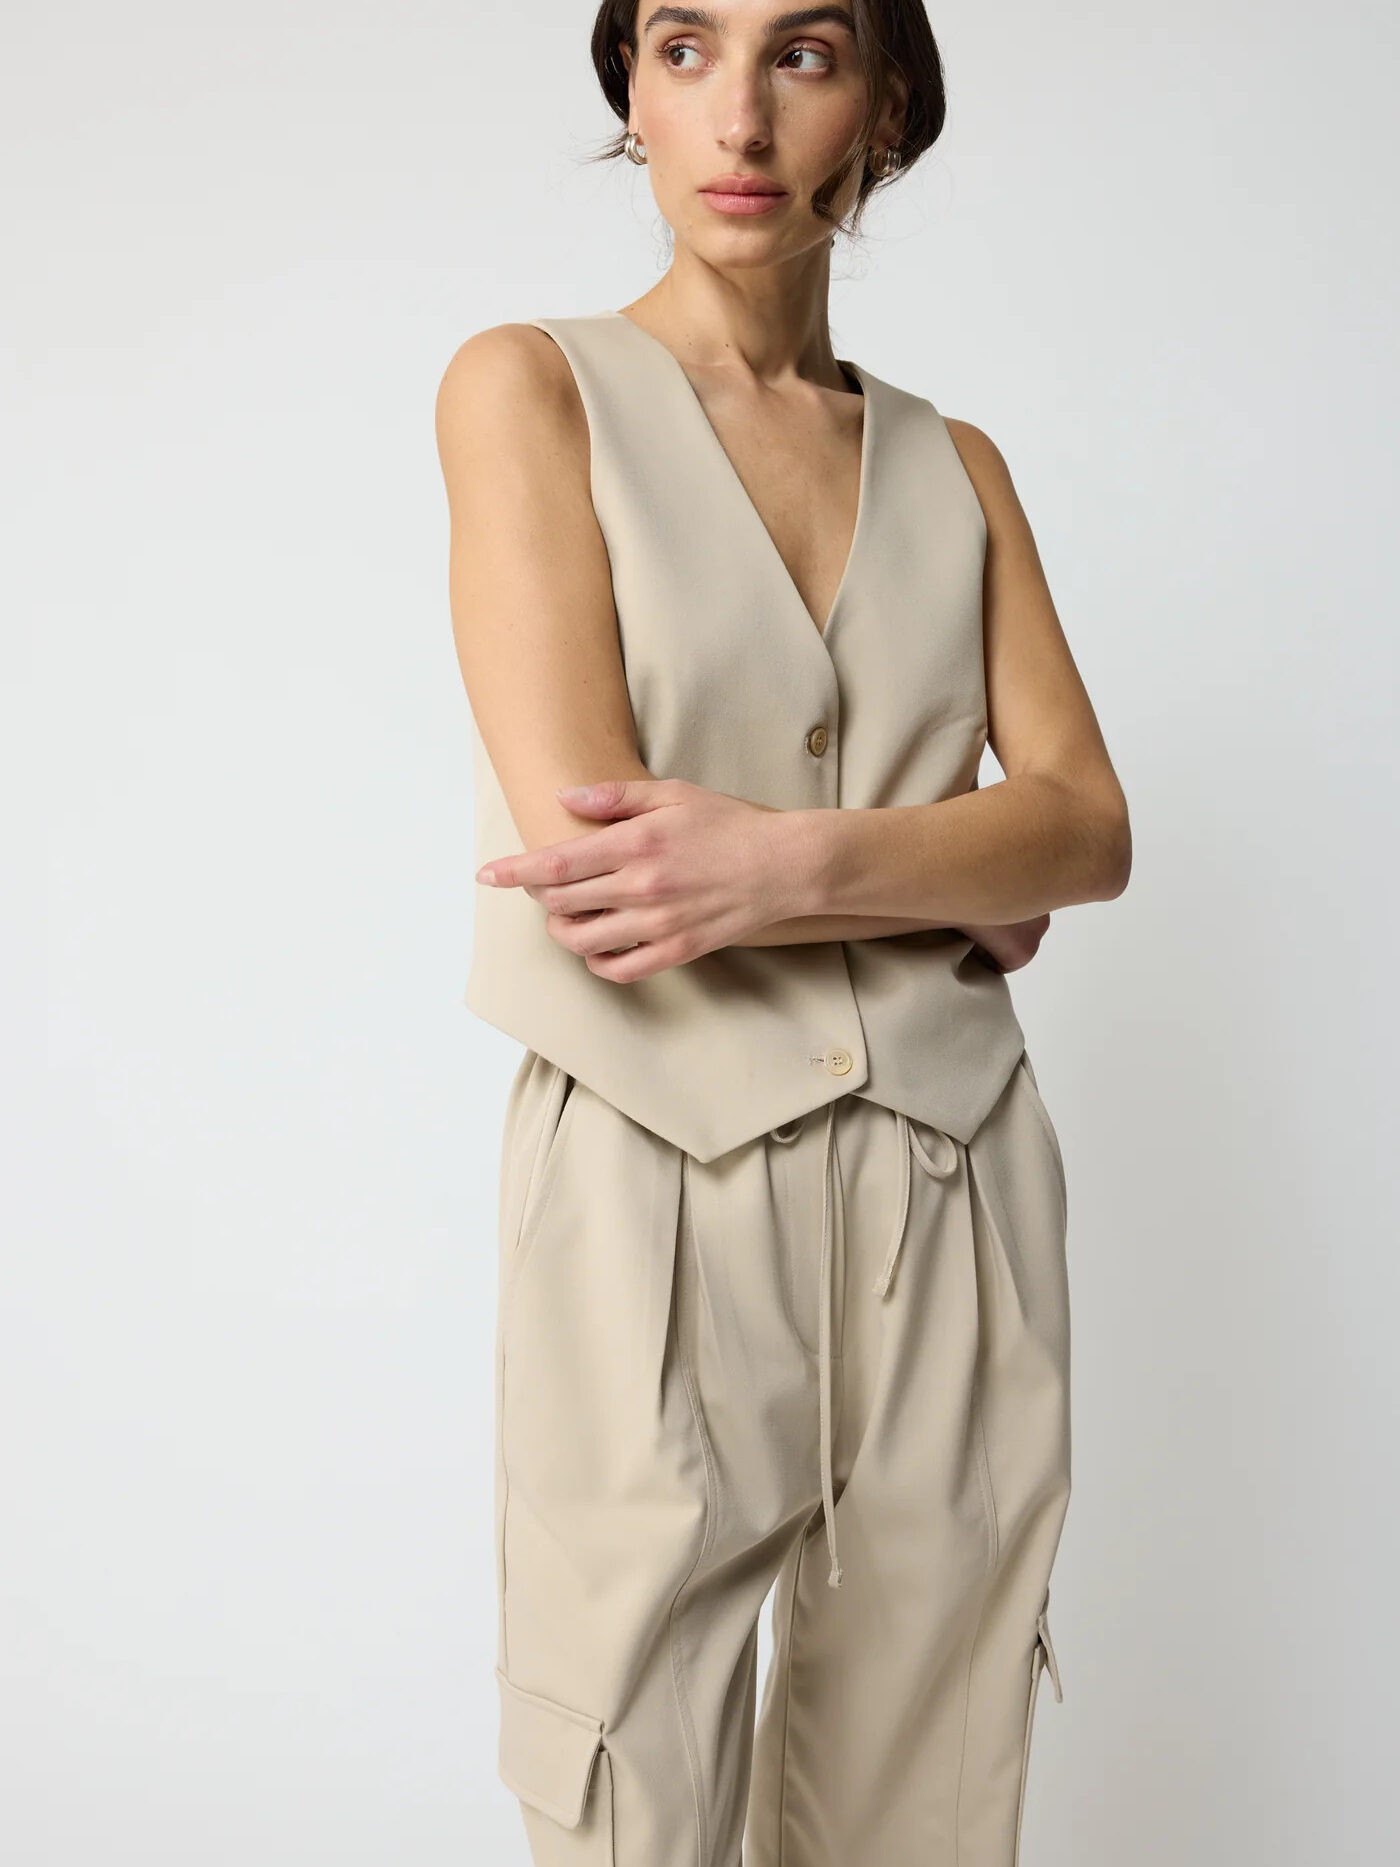 Woman in a beige sleeveless top and matching trousers posing with crossed arms on a plain background.